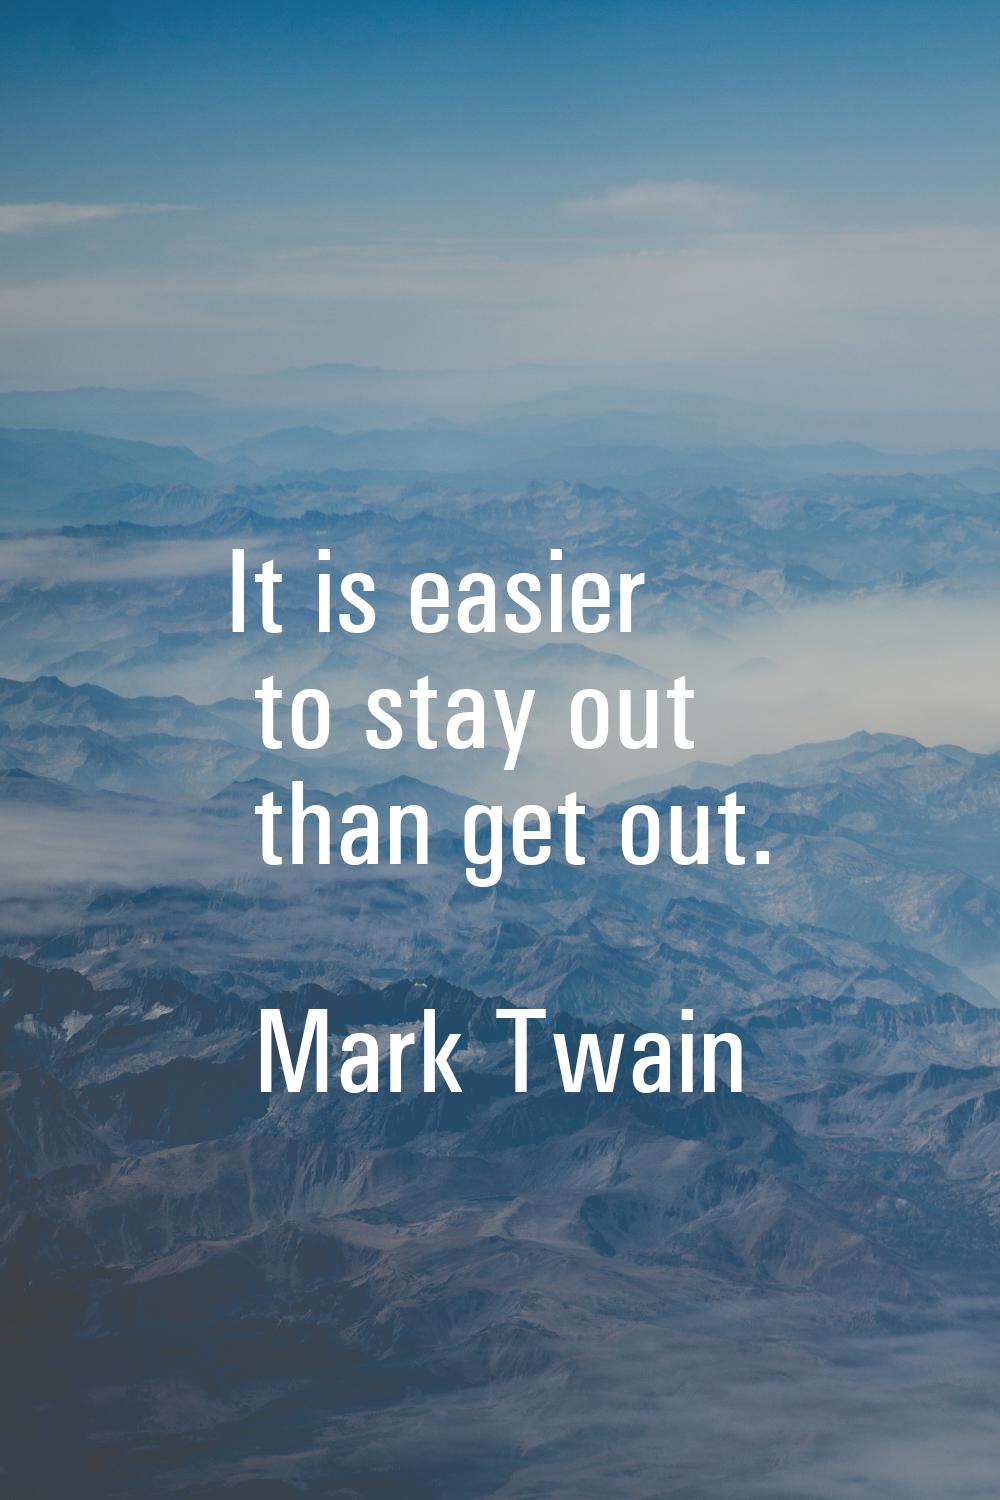 It is easier to stay out than get out.